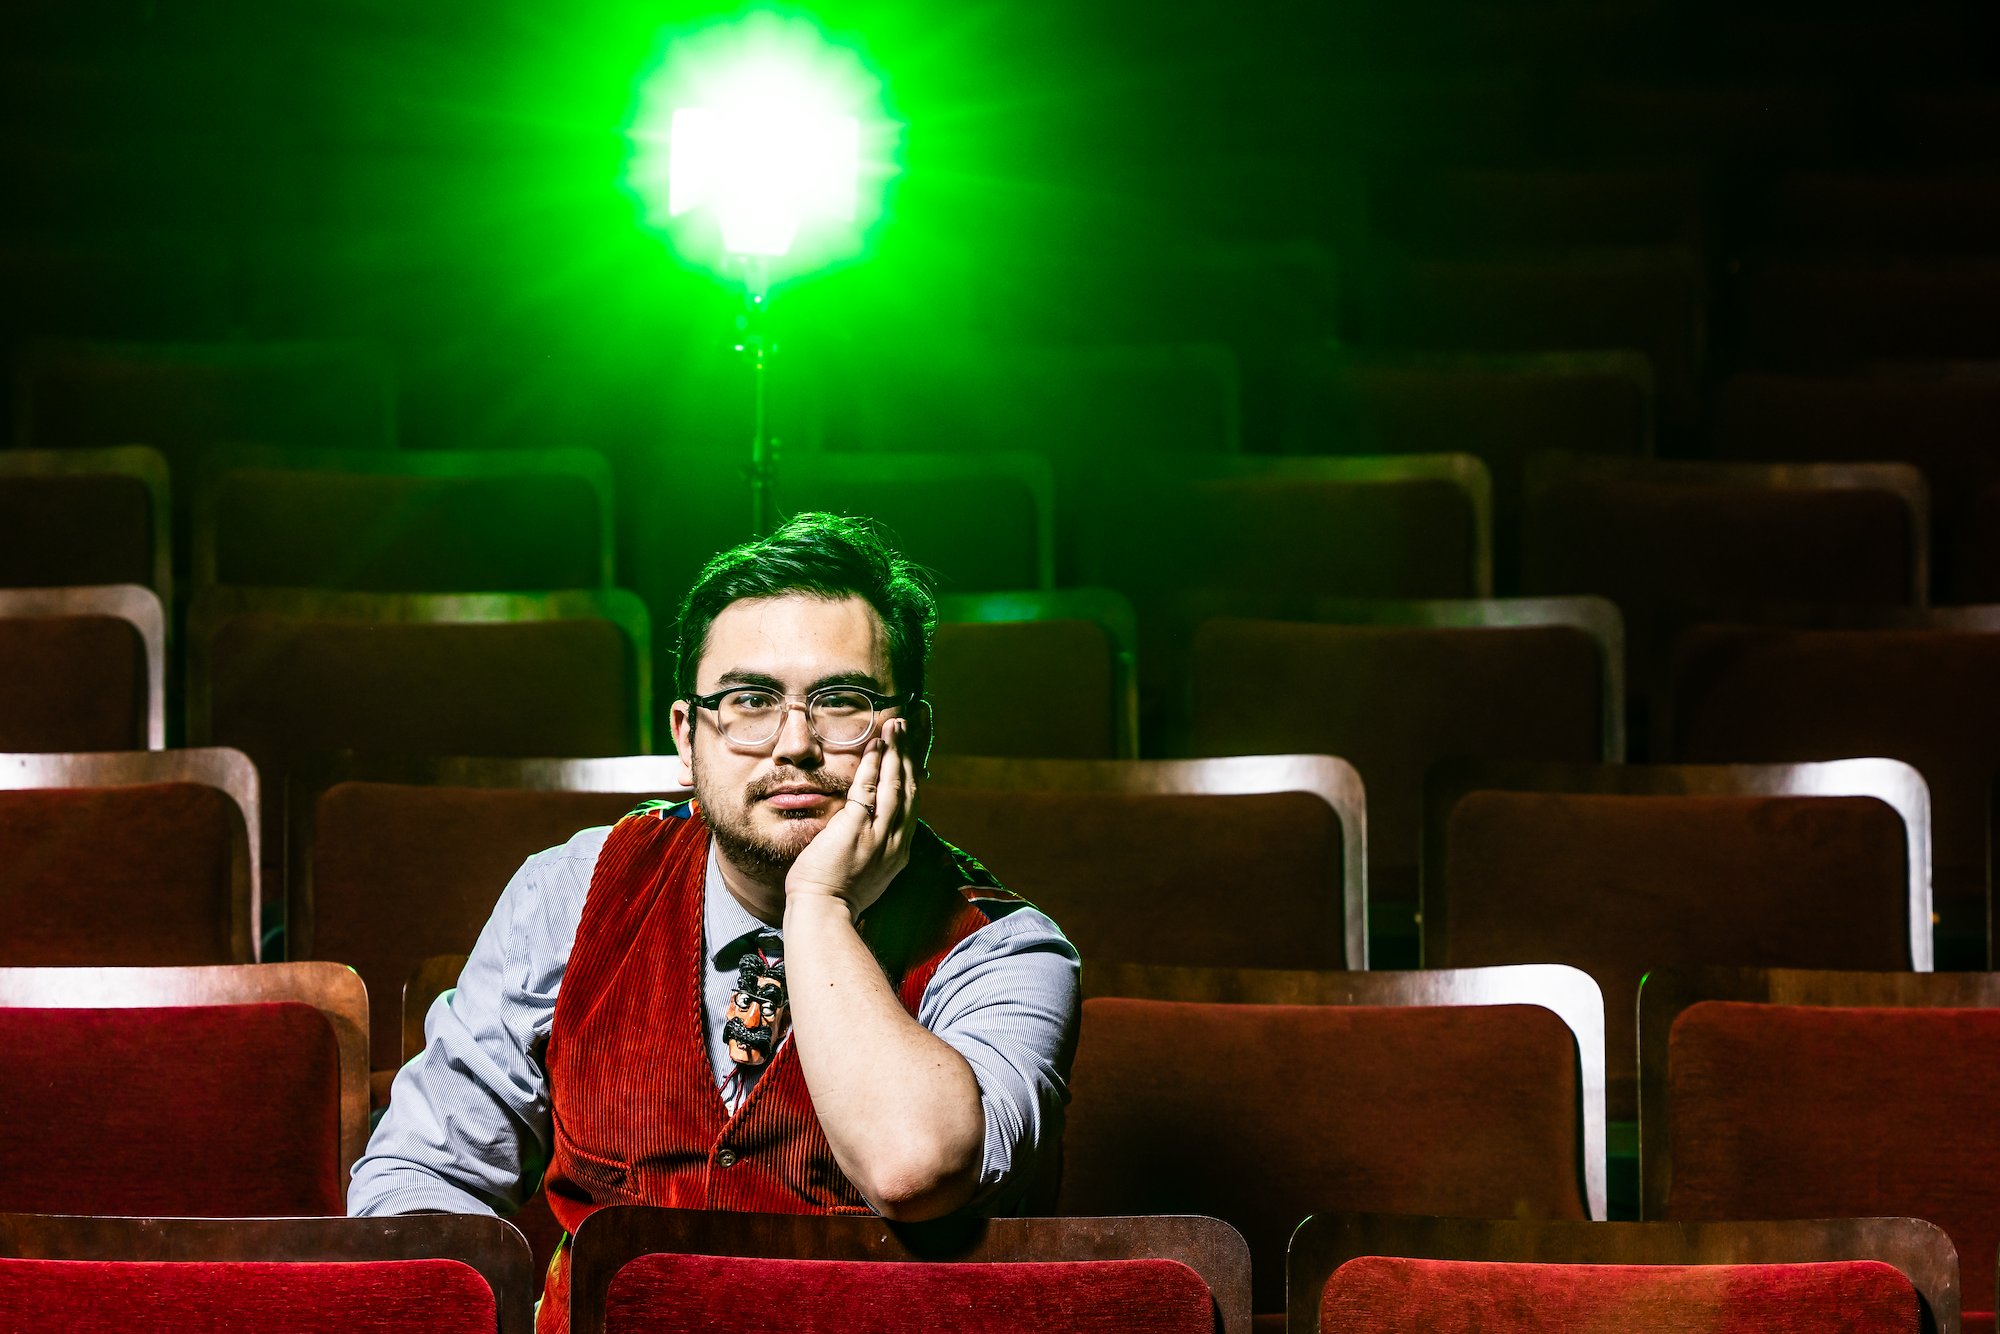 A Latino man with short, dark hair sits in an auditorium wearing horned rim glasses, and a red vest over a long-sleeved blue shirt. His chin is propped up on his hand and a green spotlight shines behind him.